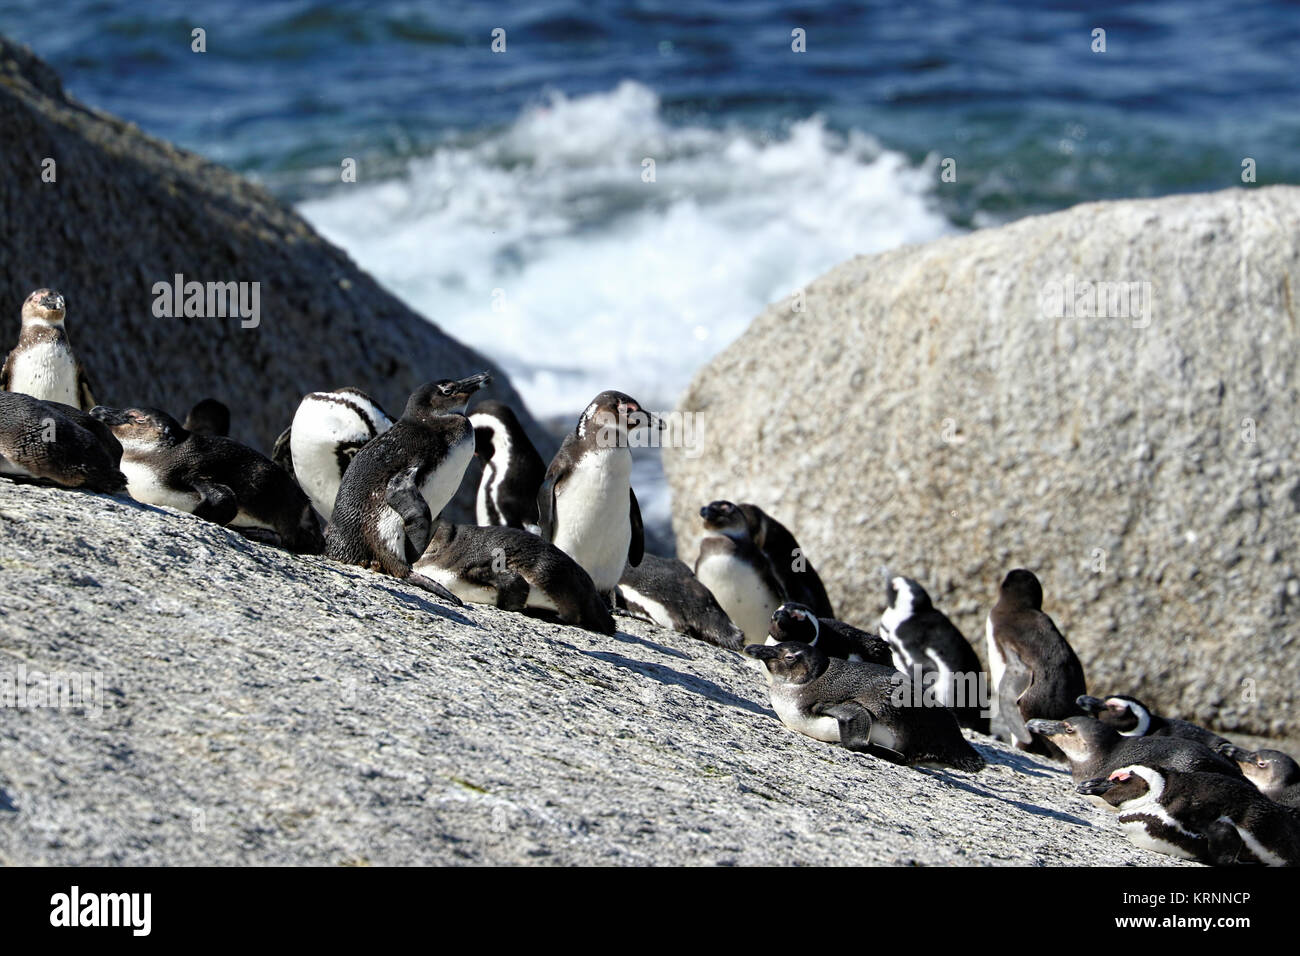 Penguins colony on Boulders Beach, Simon's Town near Cape Town, South Africa. Stock Photo